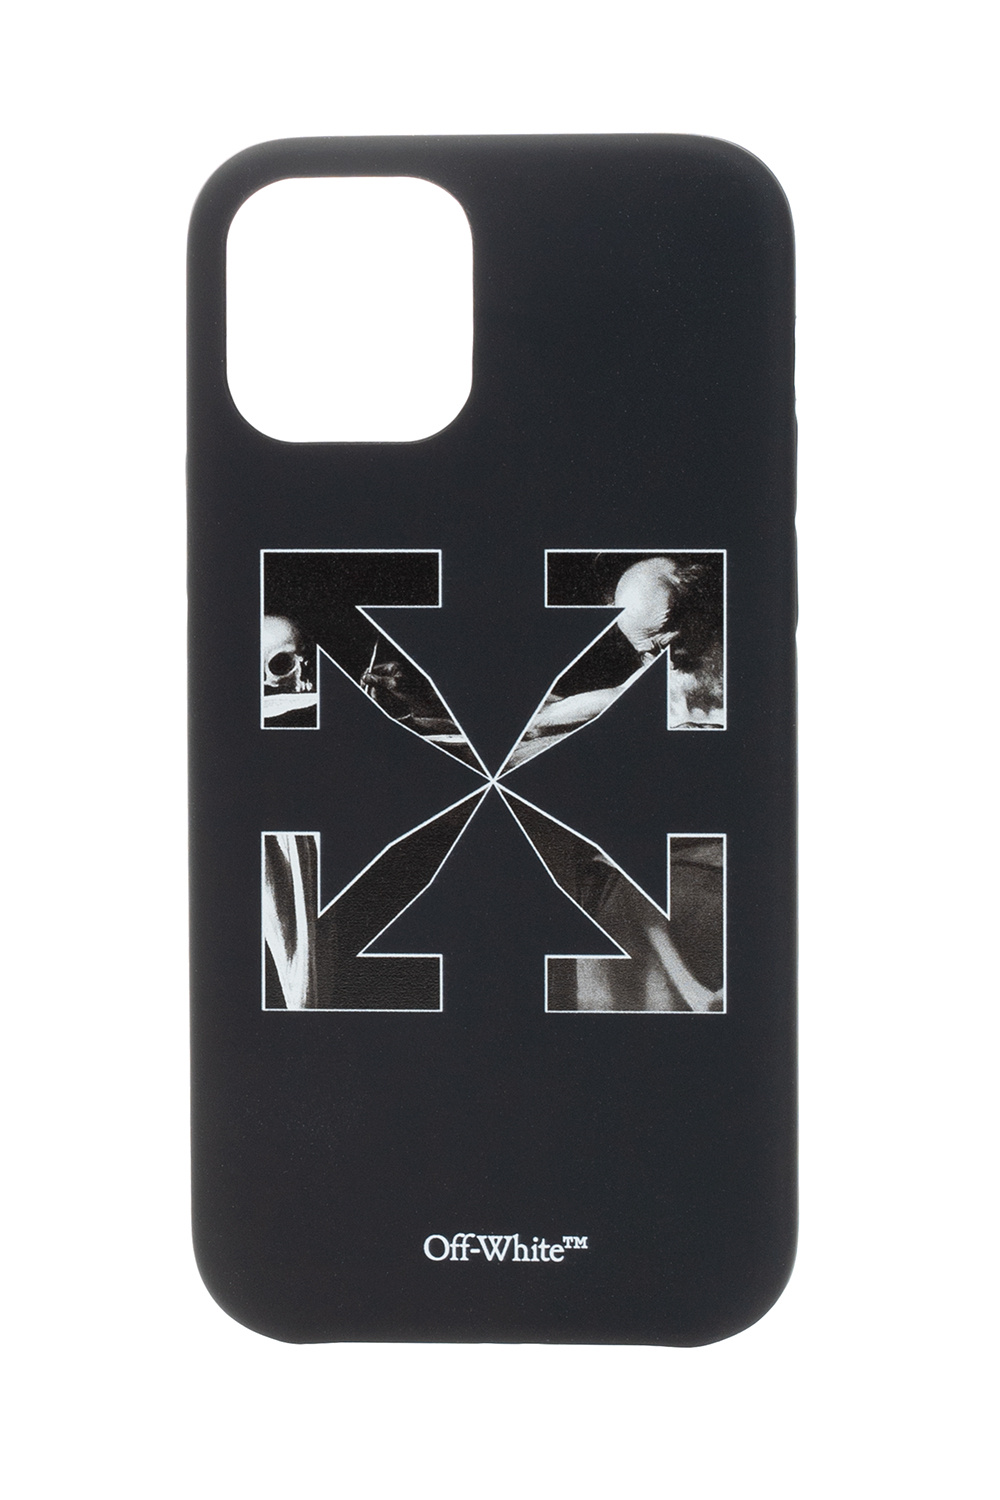 Off-White iPhone 12/12 Pro case